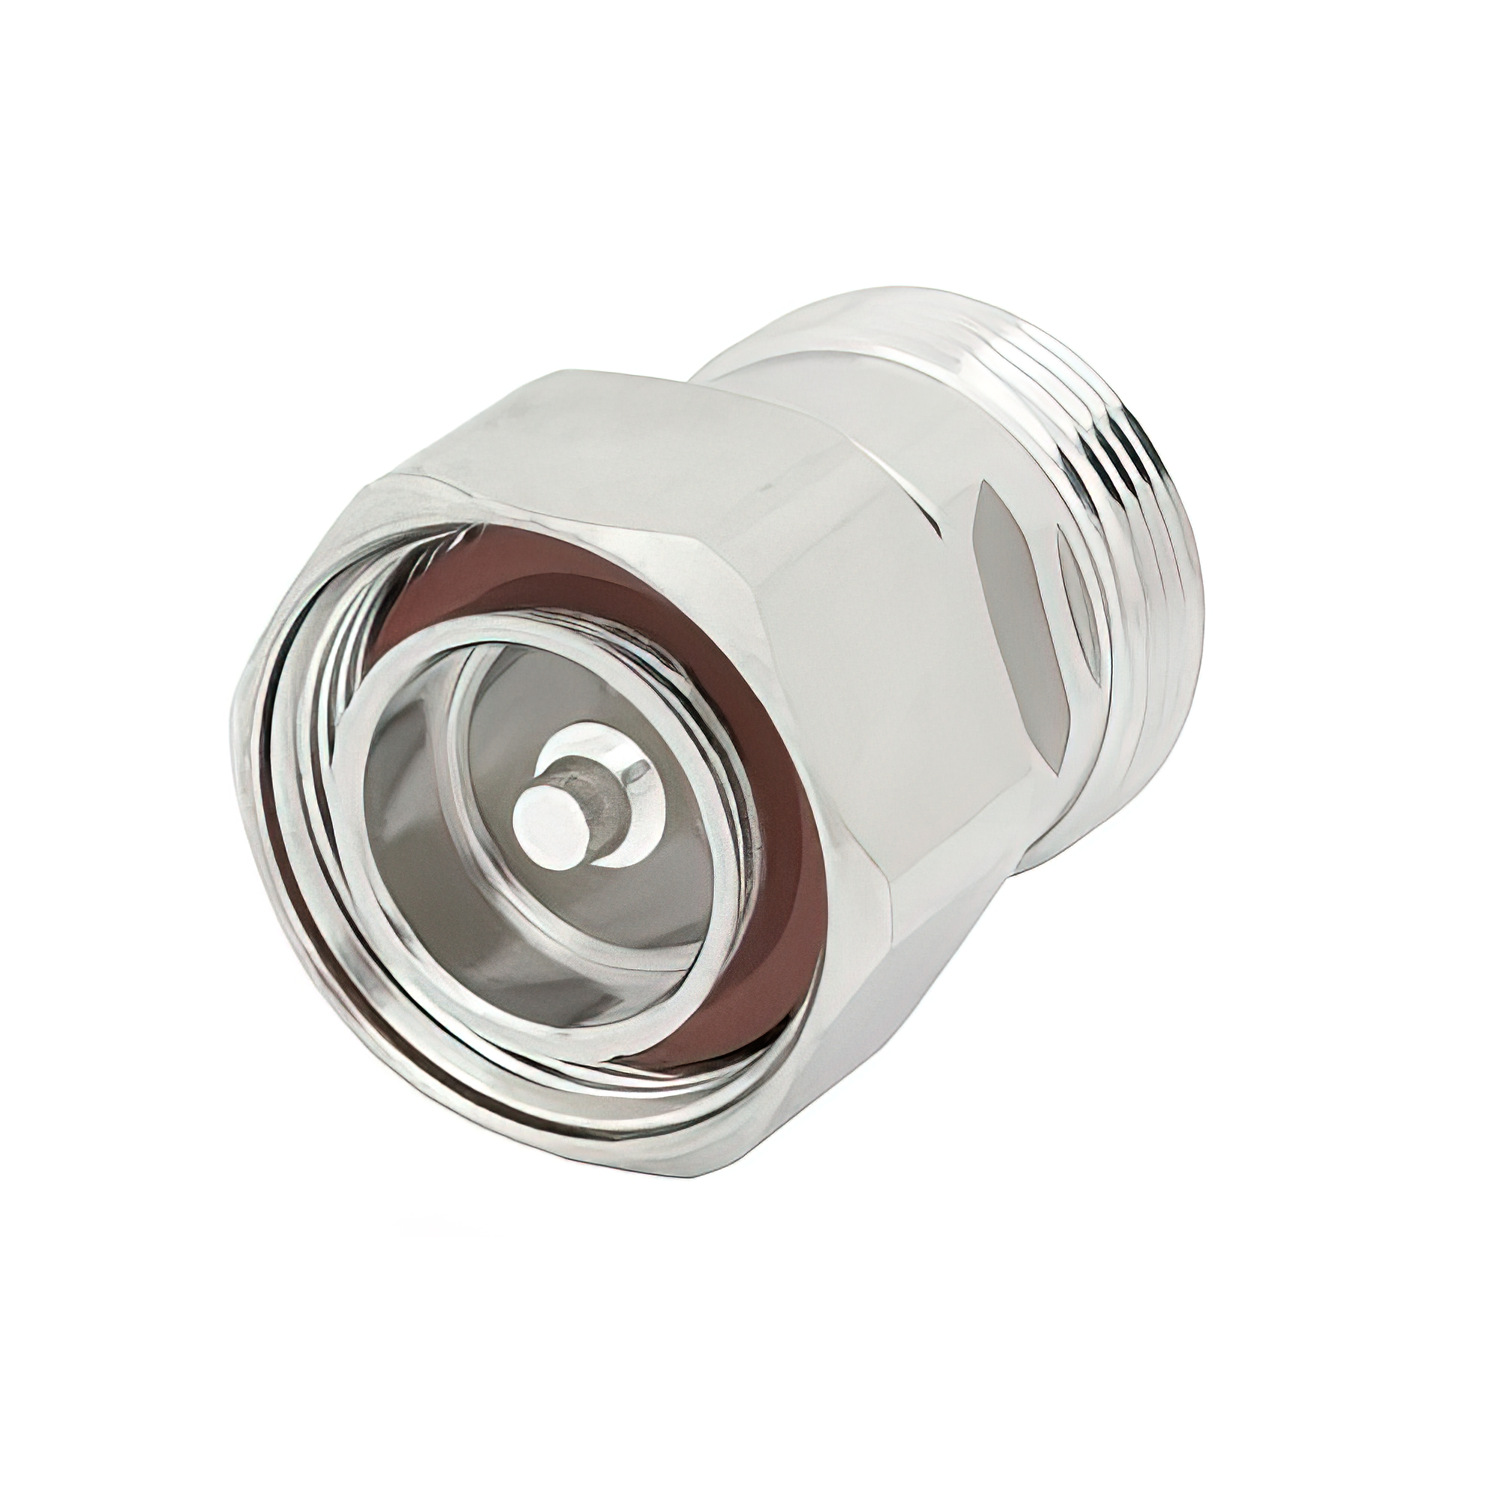 Low PIM 7-16 DIN Male to 7-16 DIN Female Adapter1